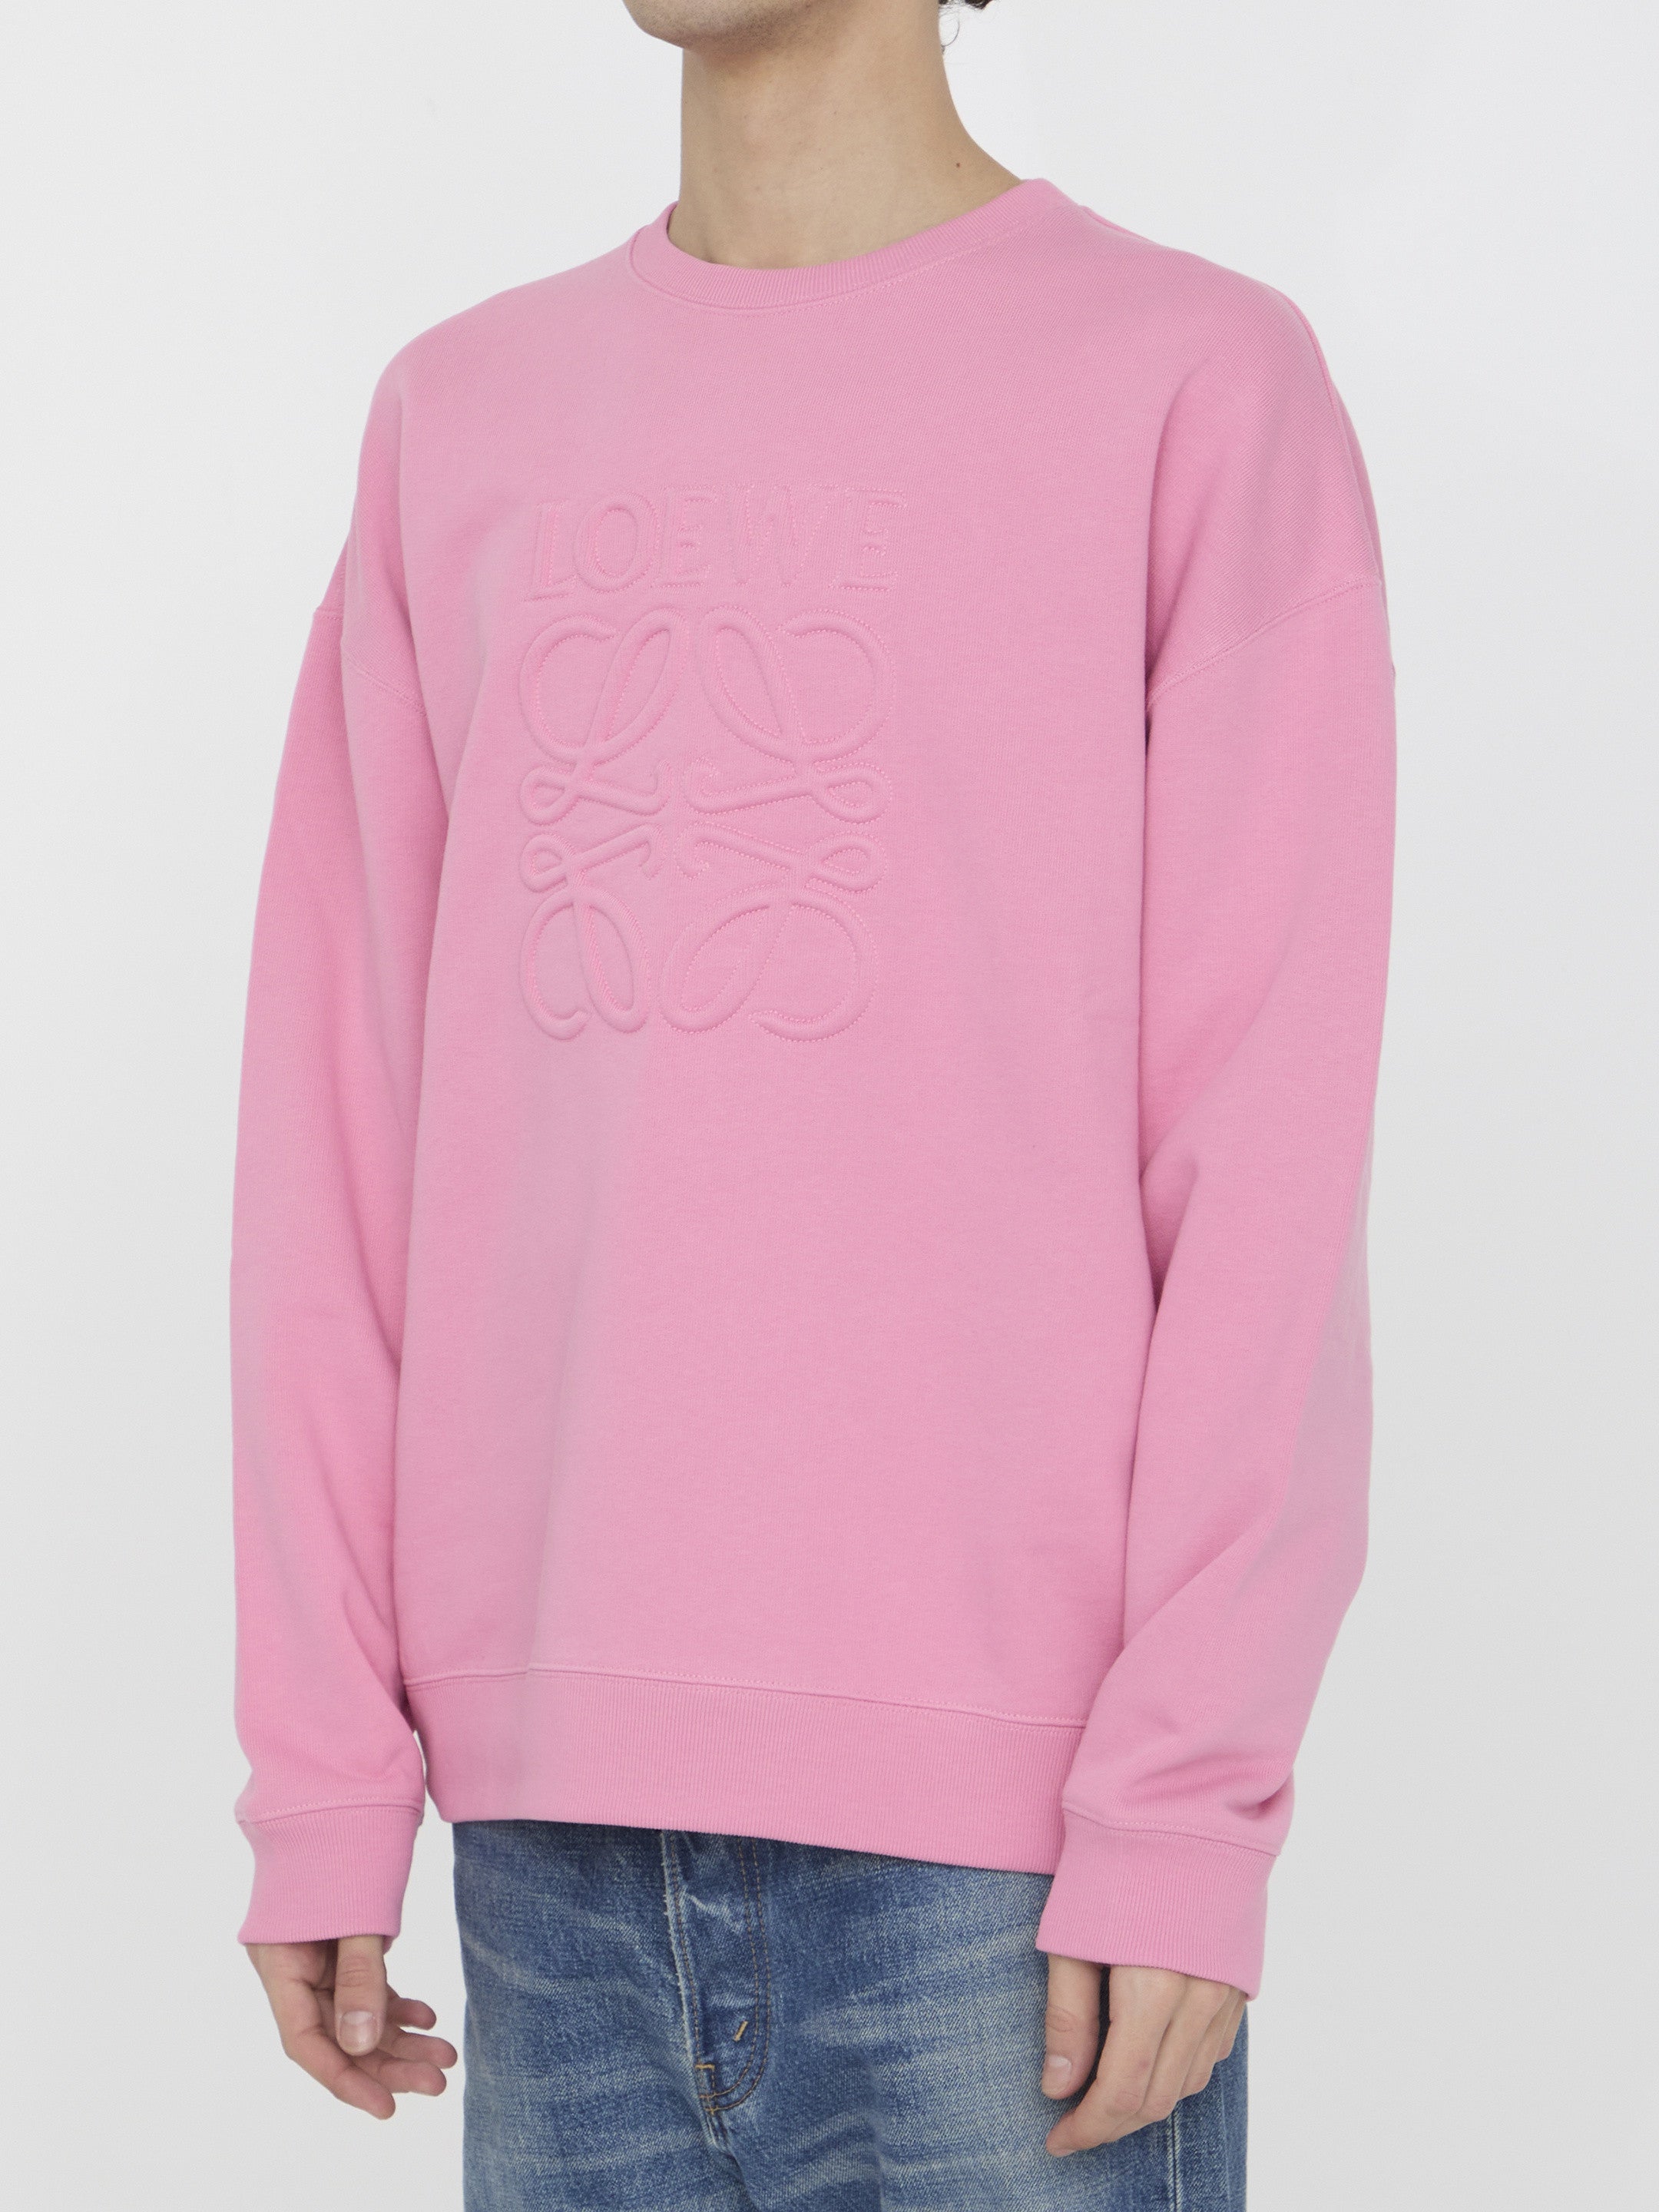 LOEWE-OUTLET-SALE-Cotton-sweatshirt-Strick-S-PINK-ARCHIVE-COLLECTION-2.jpg